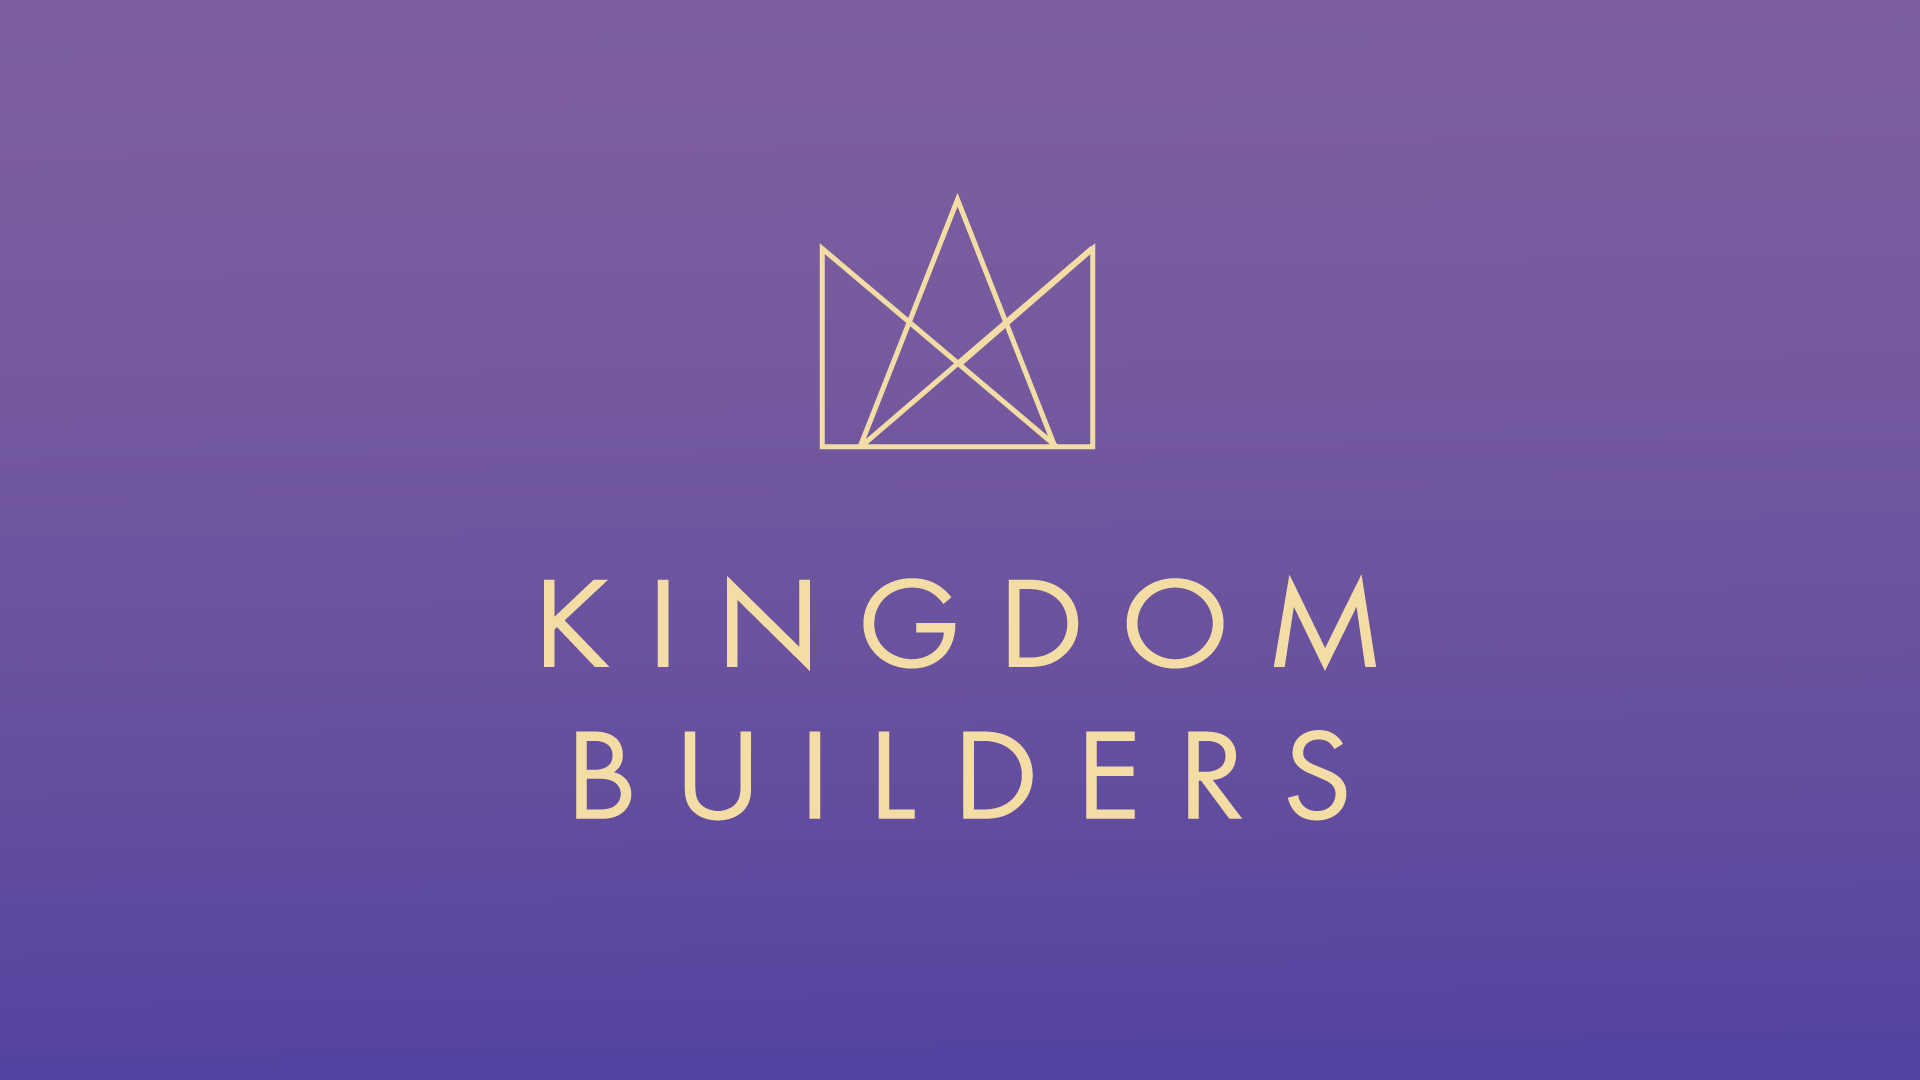 Featured image for “Kingdom Builders”